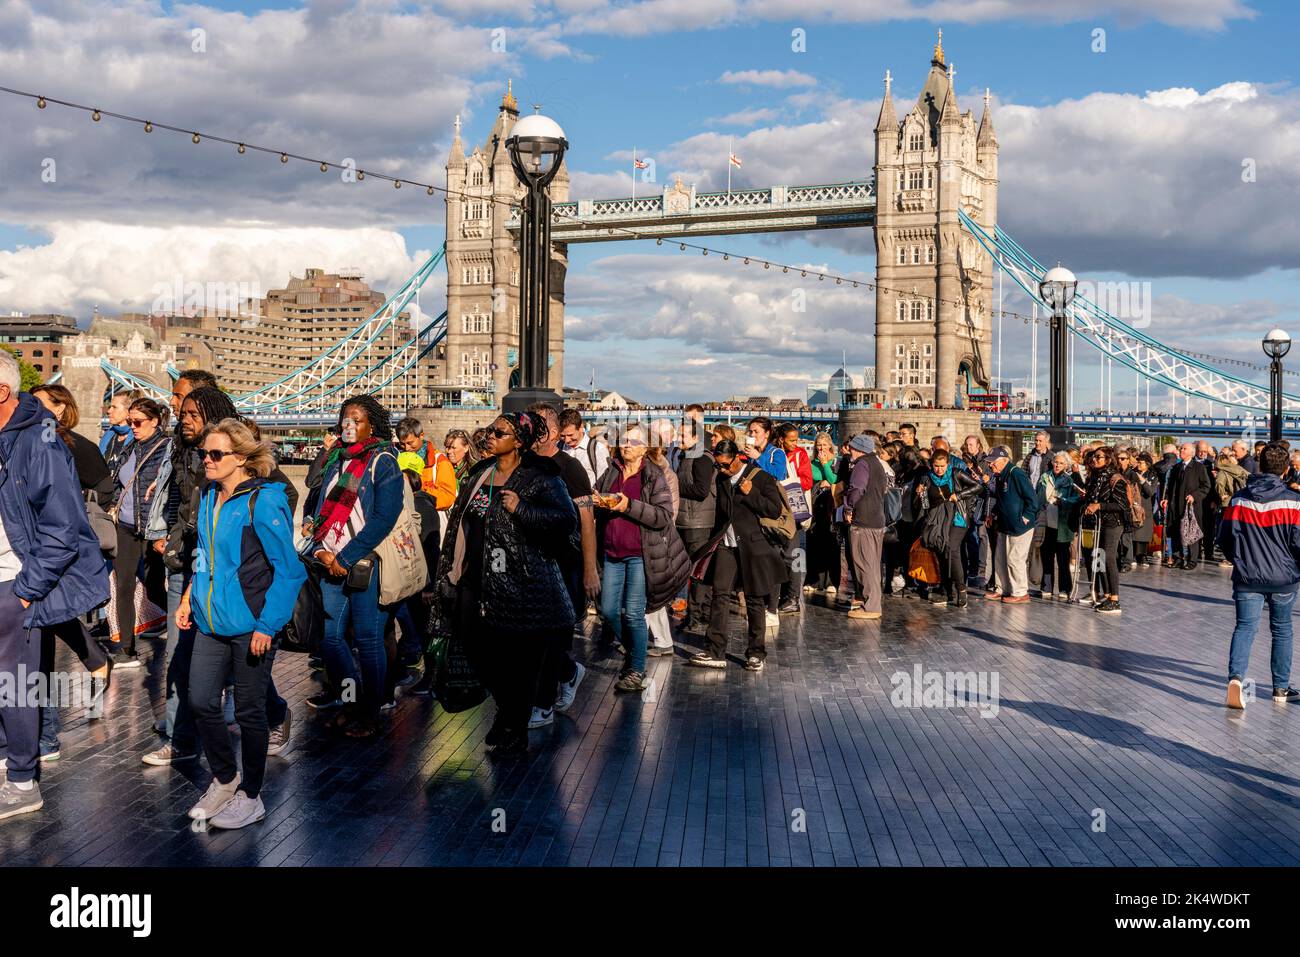 Stretching Back To Tower Bridge, British People and People From Around The World Queue To See The Queen Lying-In-State At Westminster Hall, London, UK Stock Photo